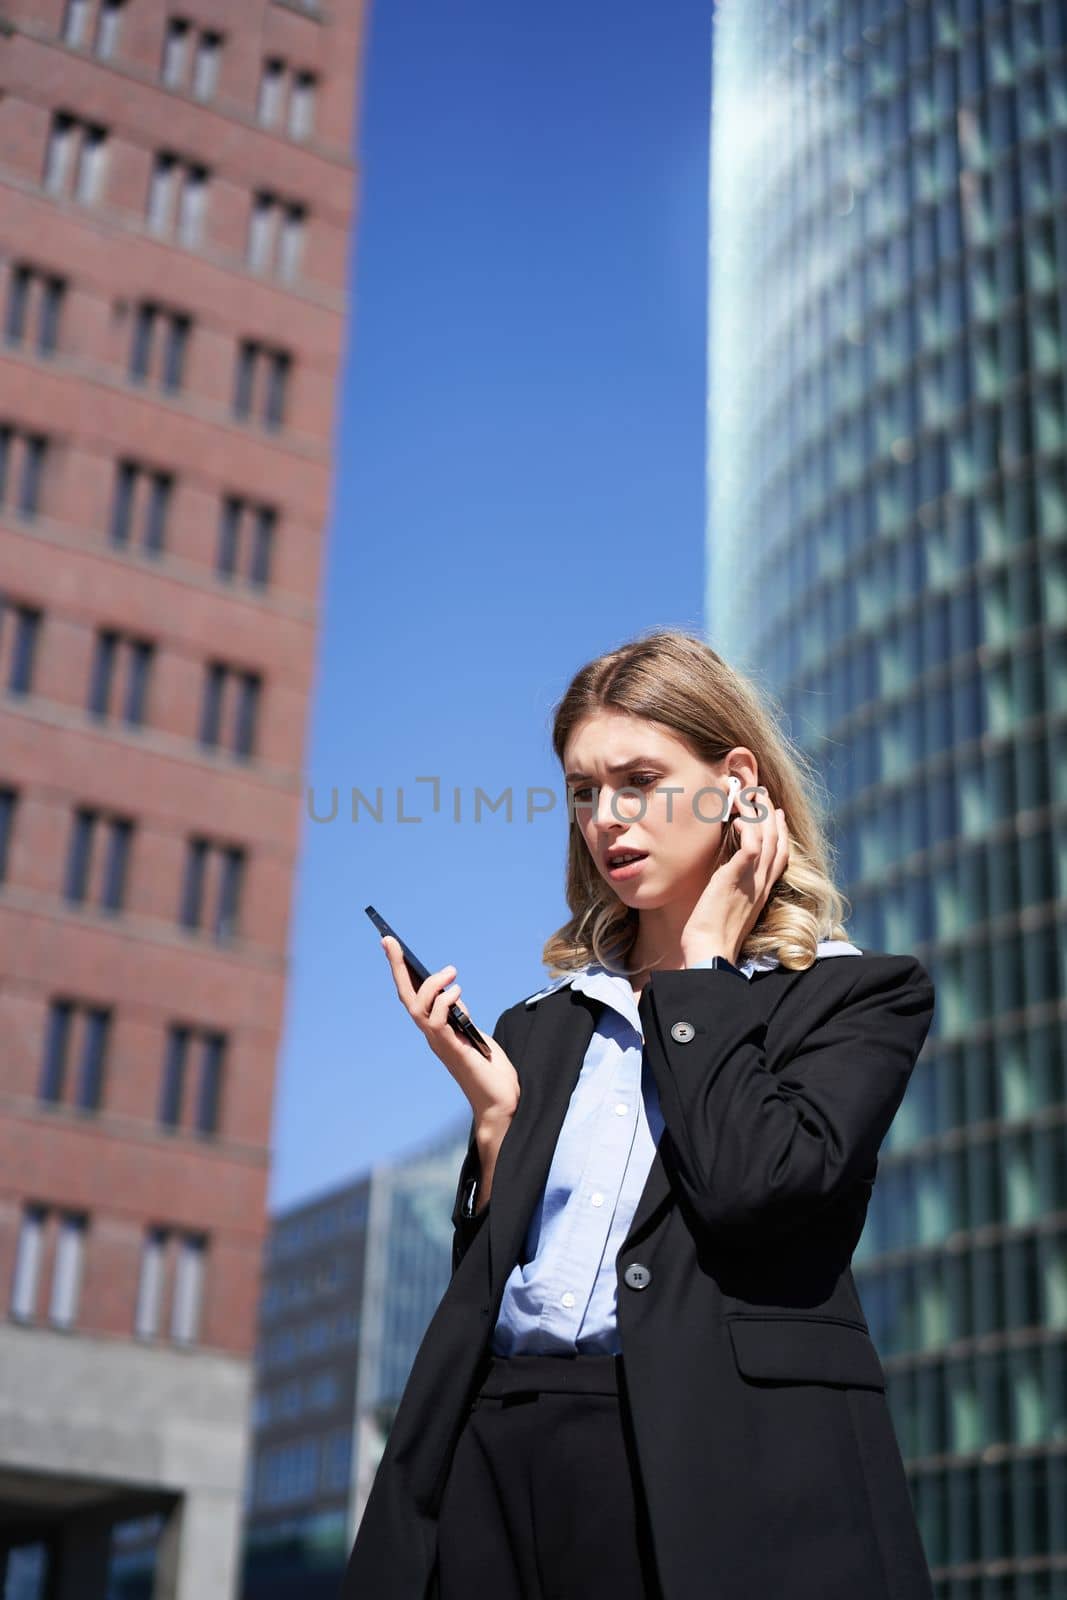 Businesswoman in wireless earphones looking at mobile phone, has concerned face expression, reads message on smartphone.